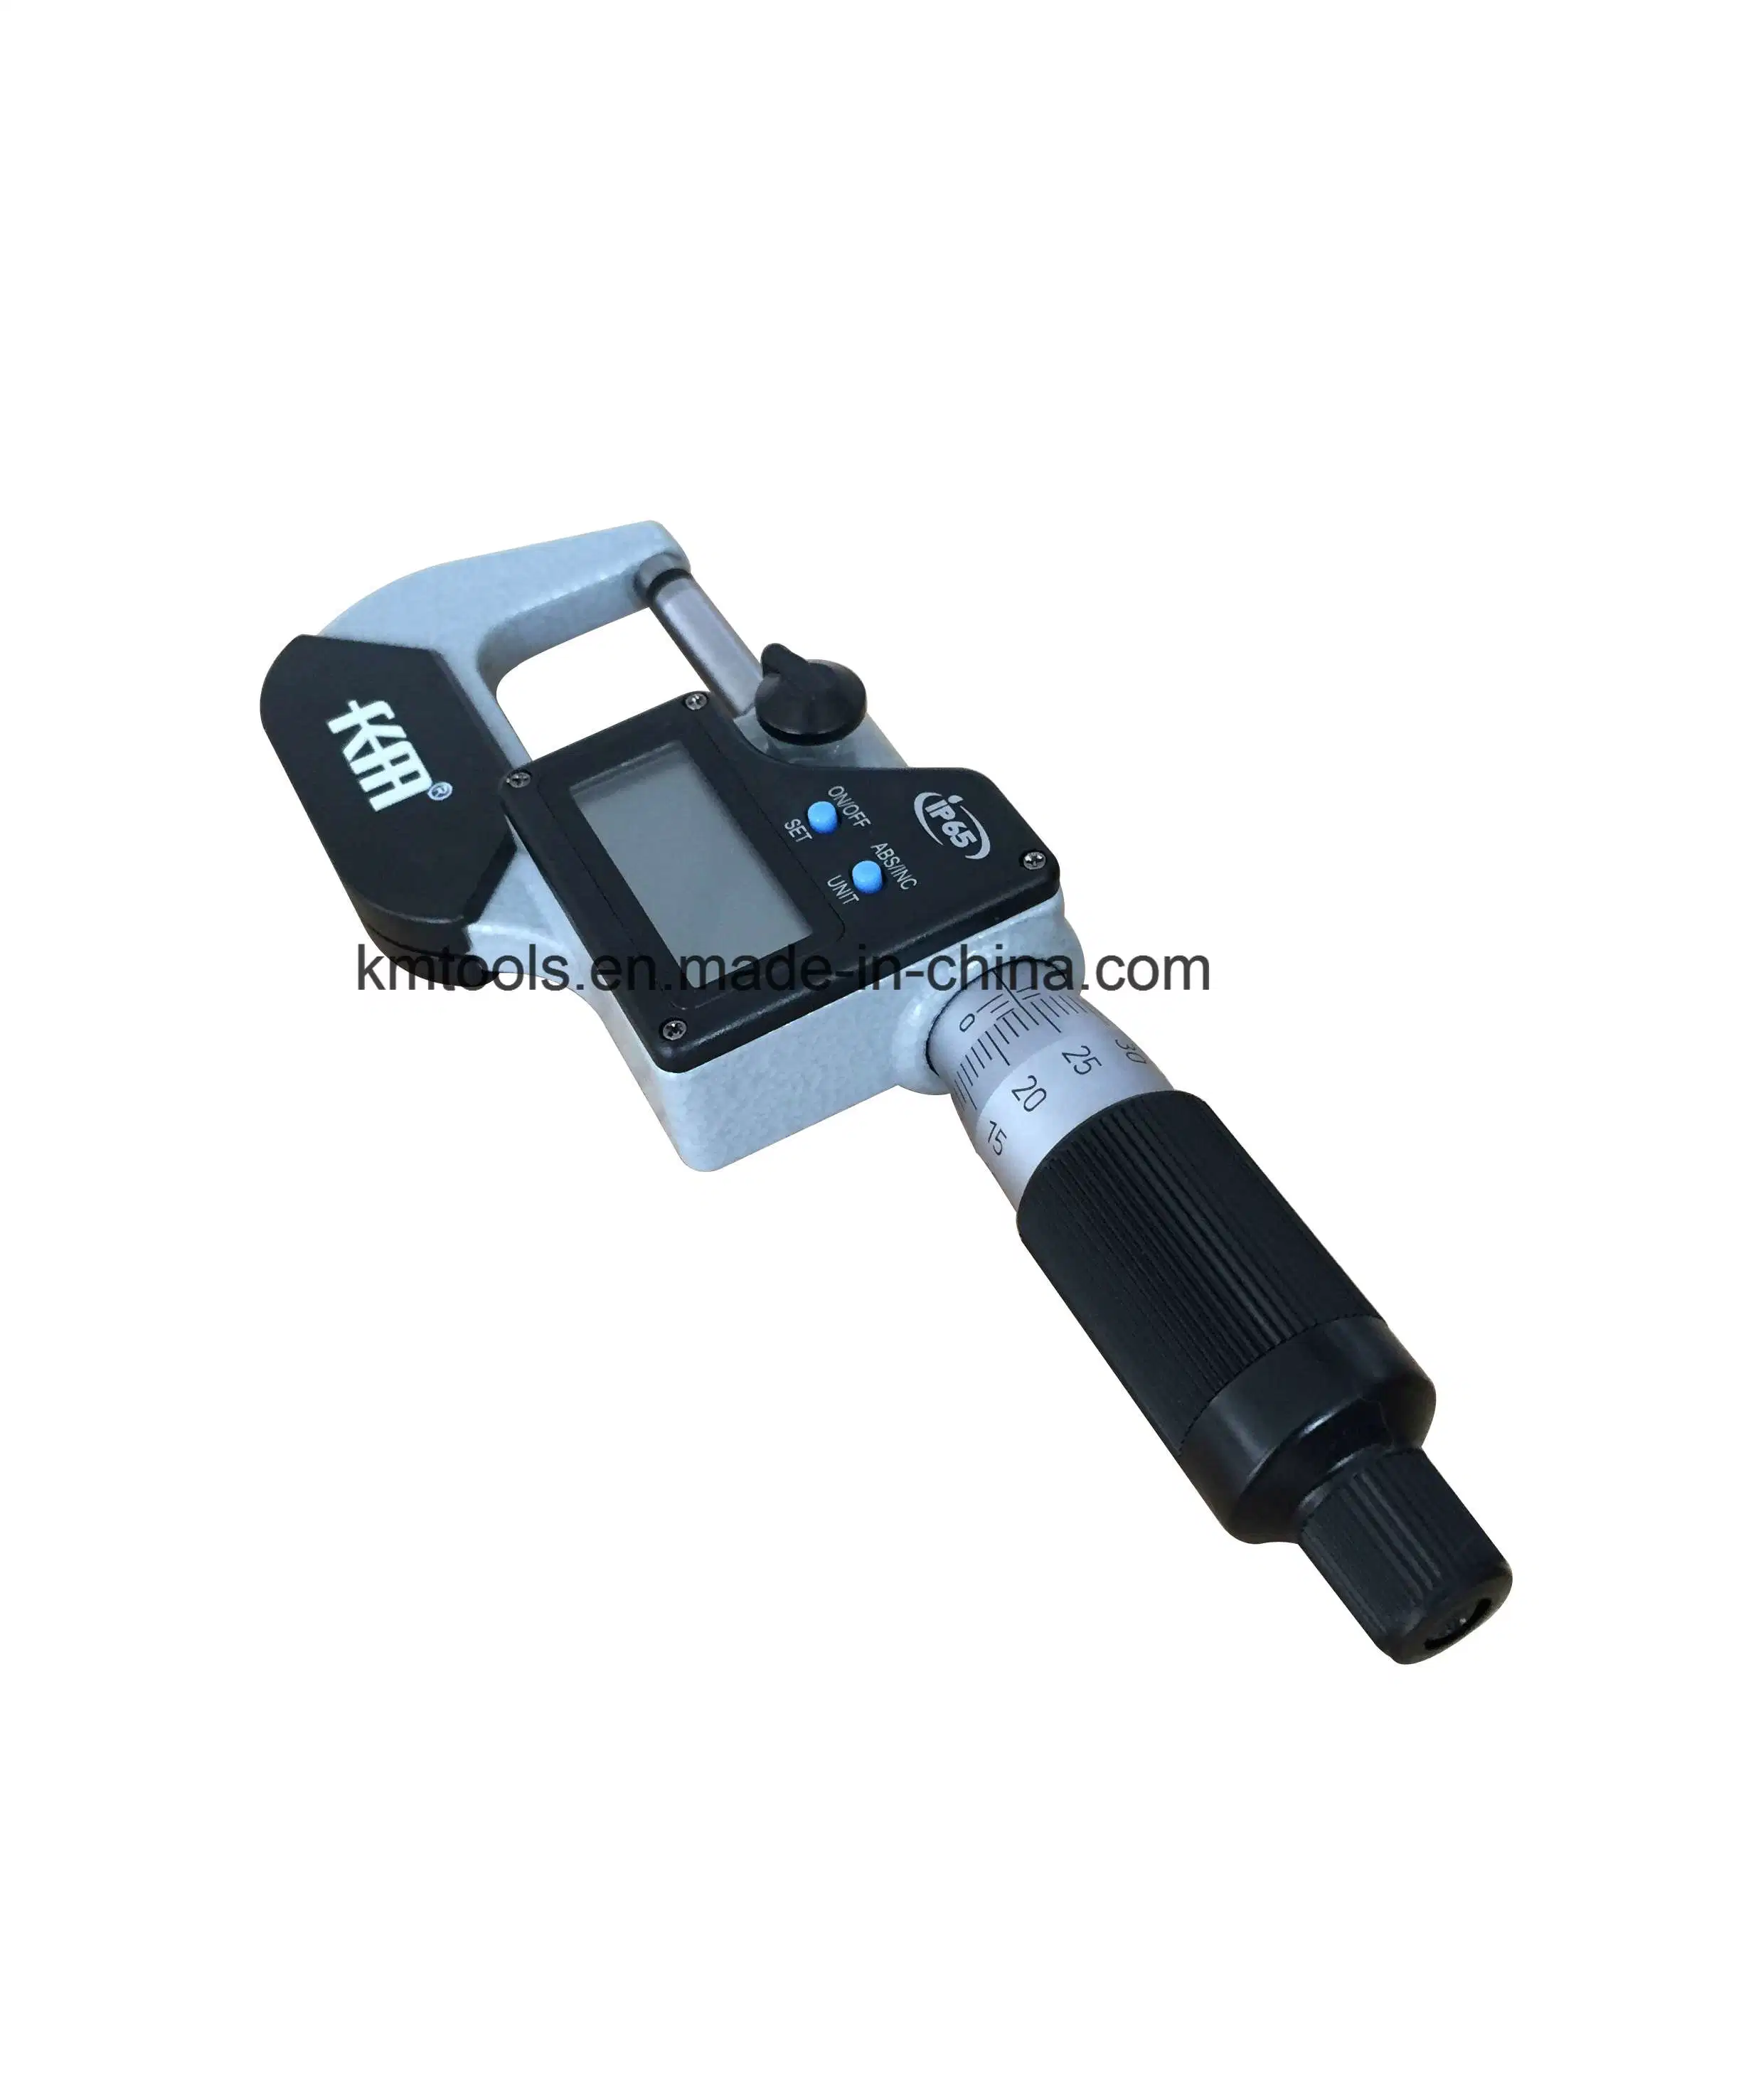 IP65 Protection Degree 0-25mm Electronic Digital Display Outside Micrometer